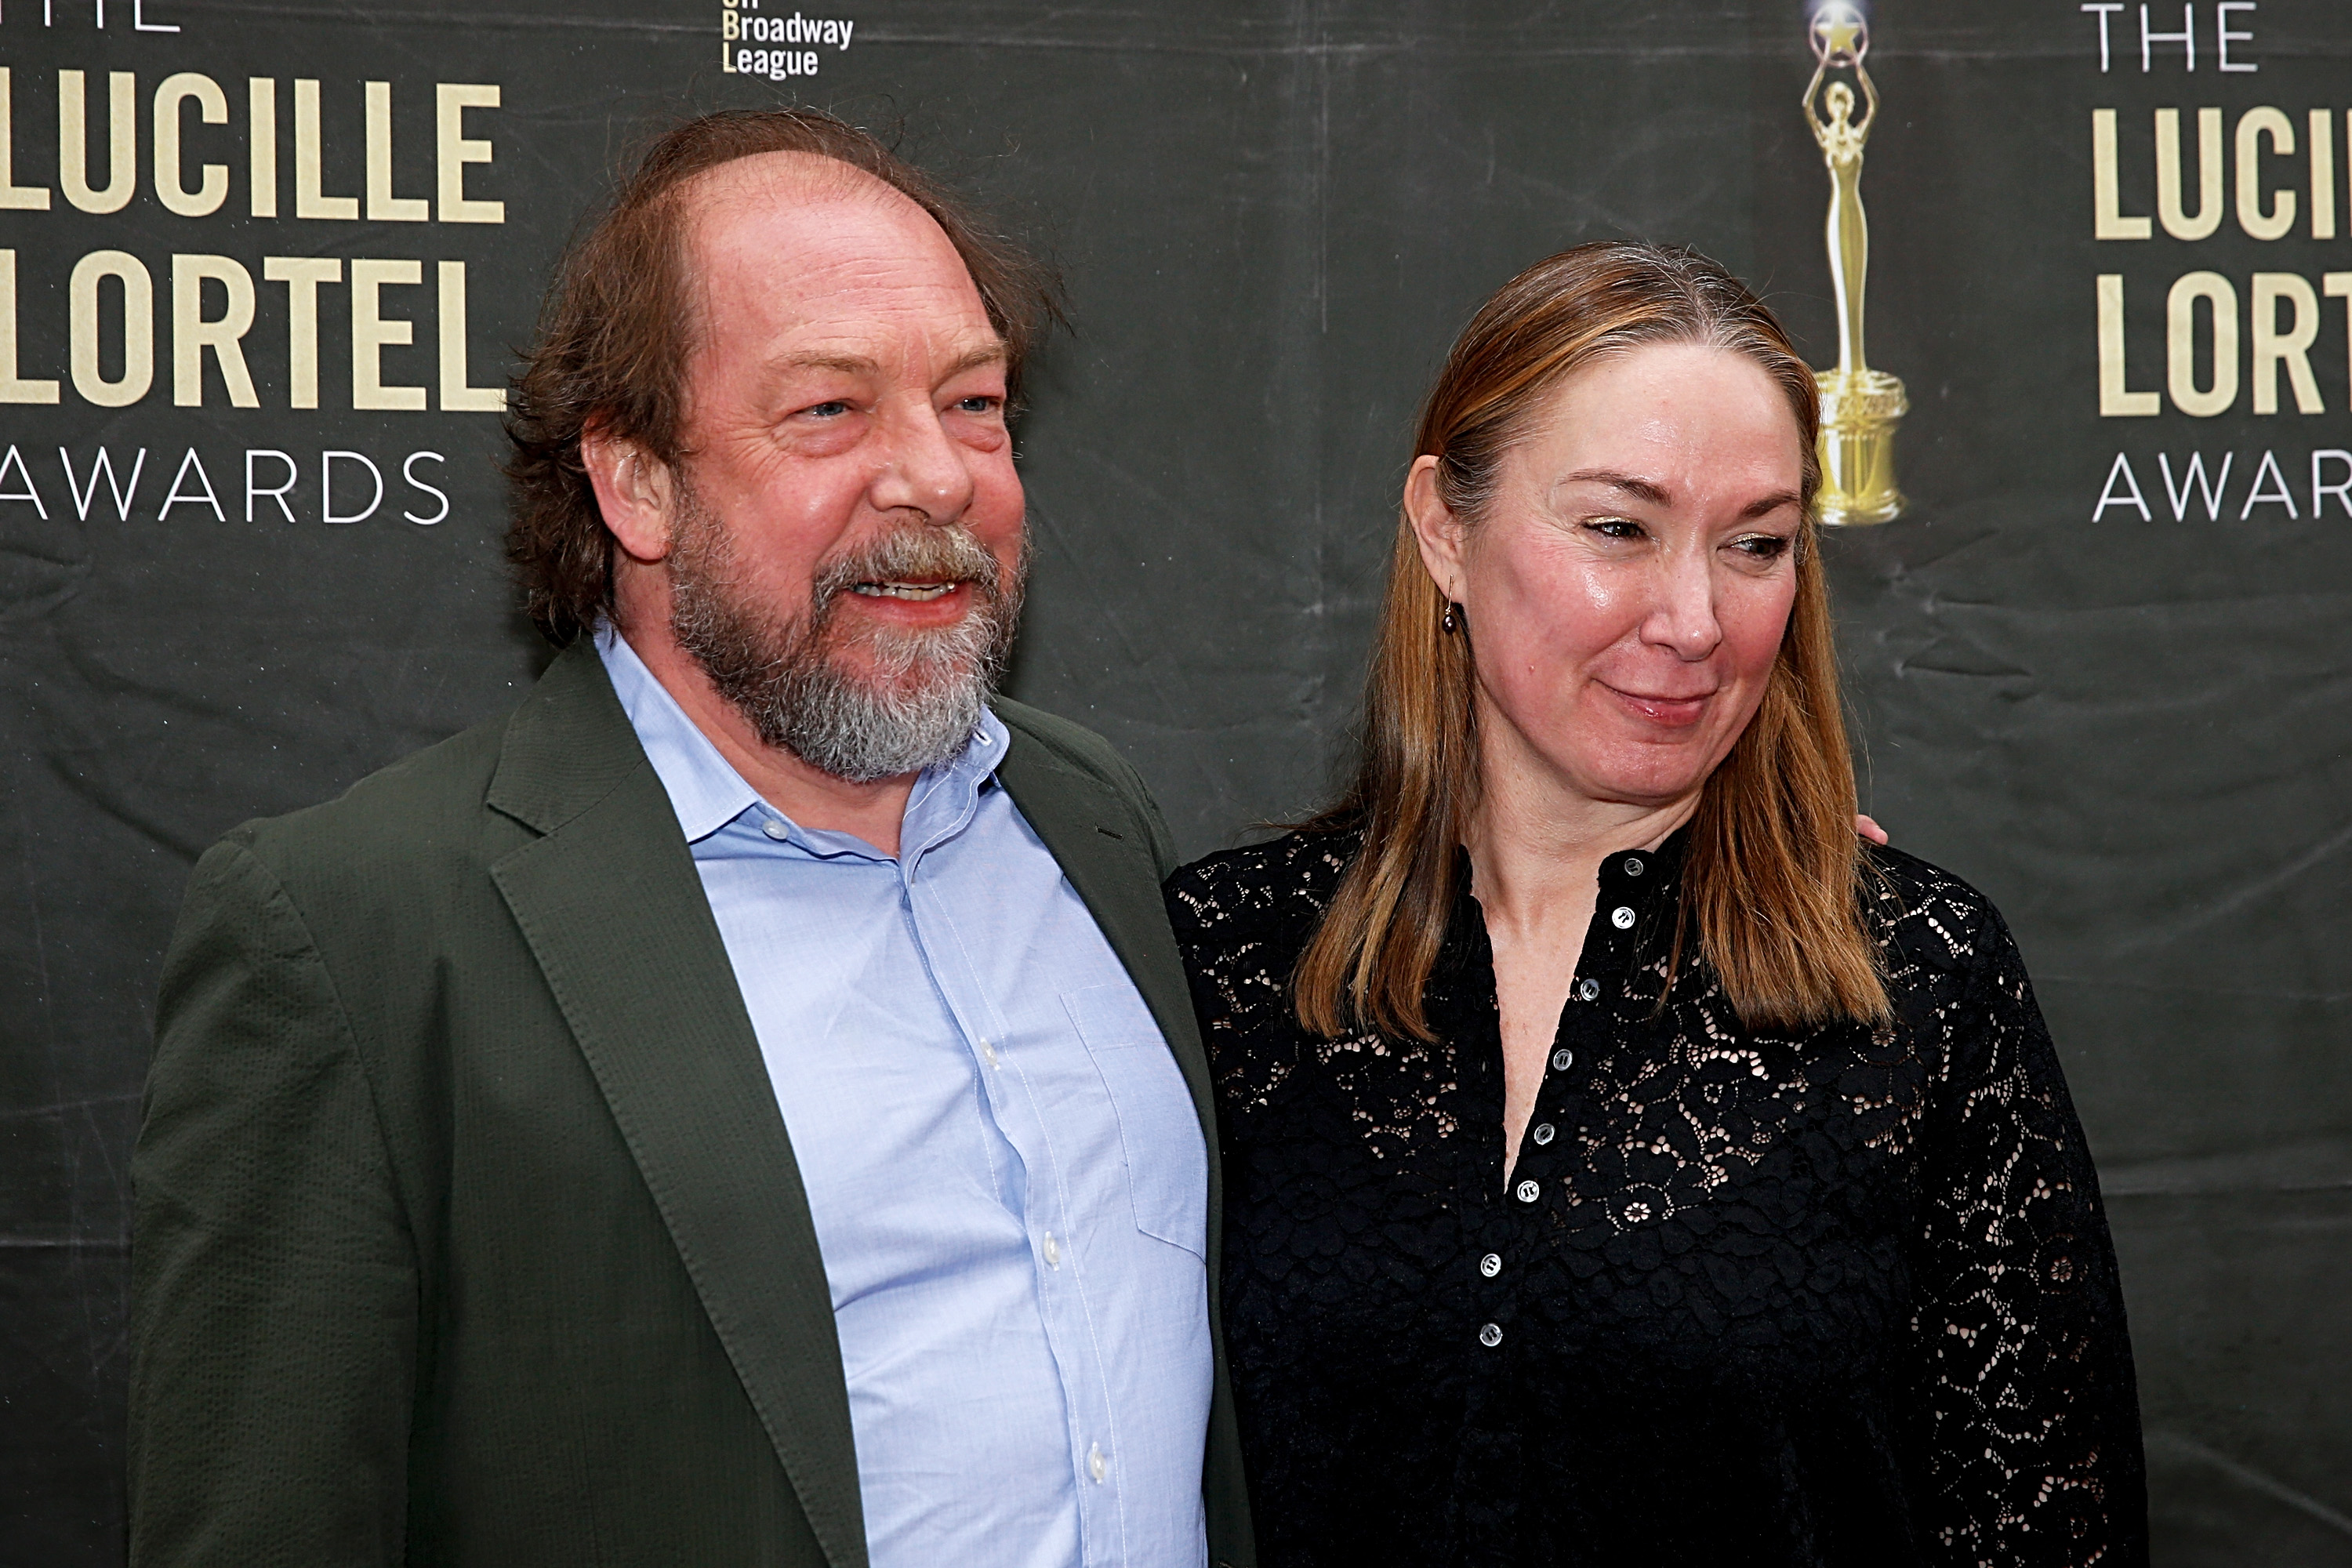 Bill Camp and Elizabeth Marvel at the 37th Annual Lucille Lortel Awards on May 1, 2022 in New York City.  | Source: Getty Images